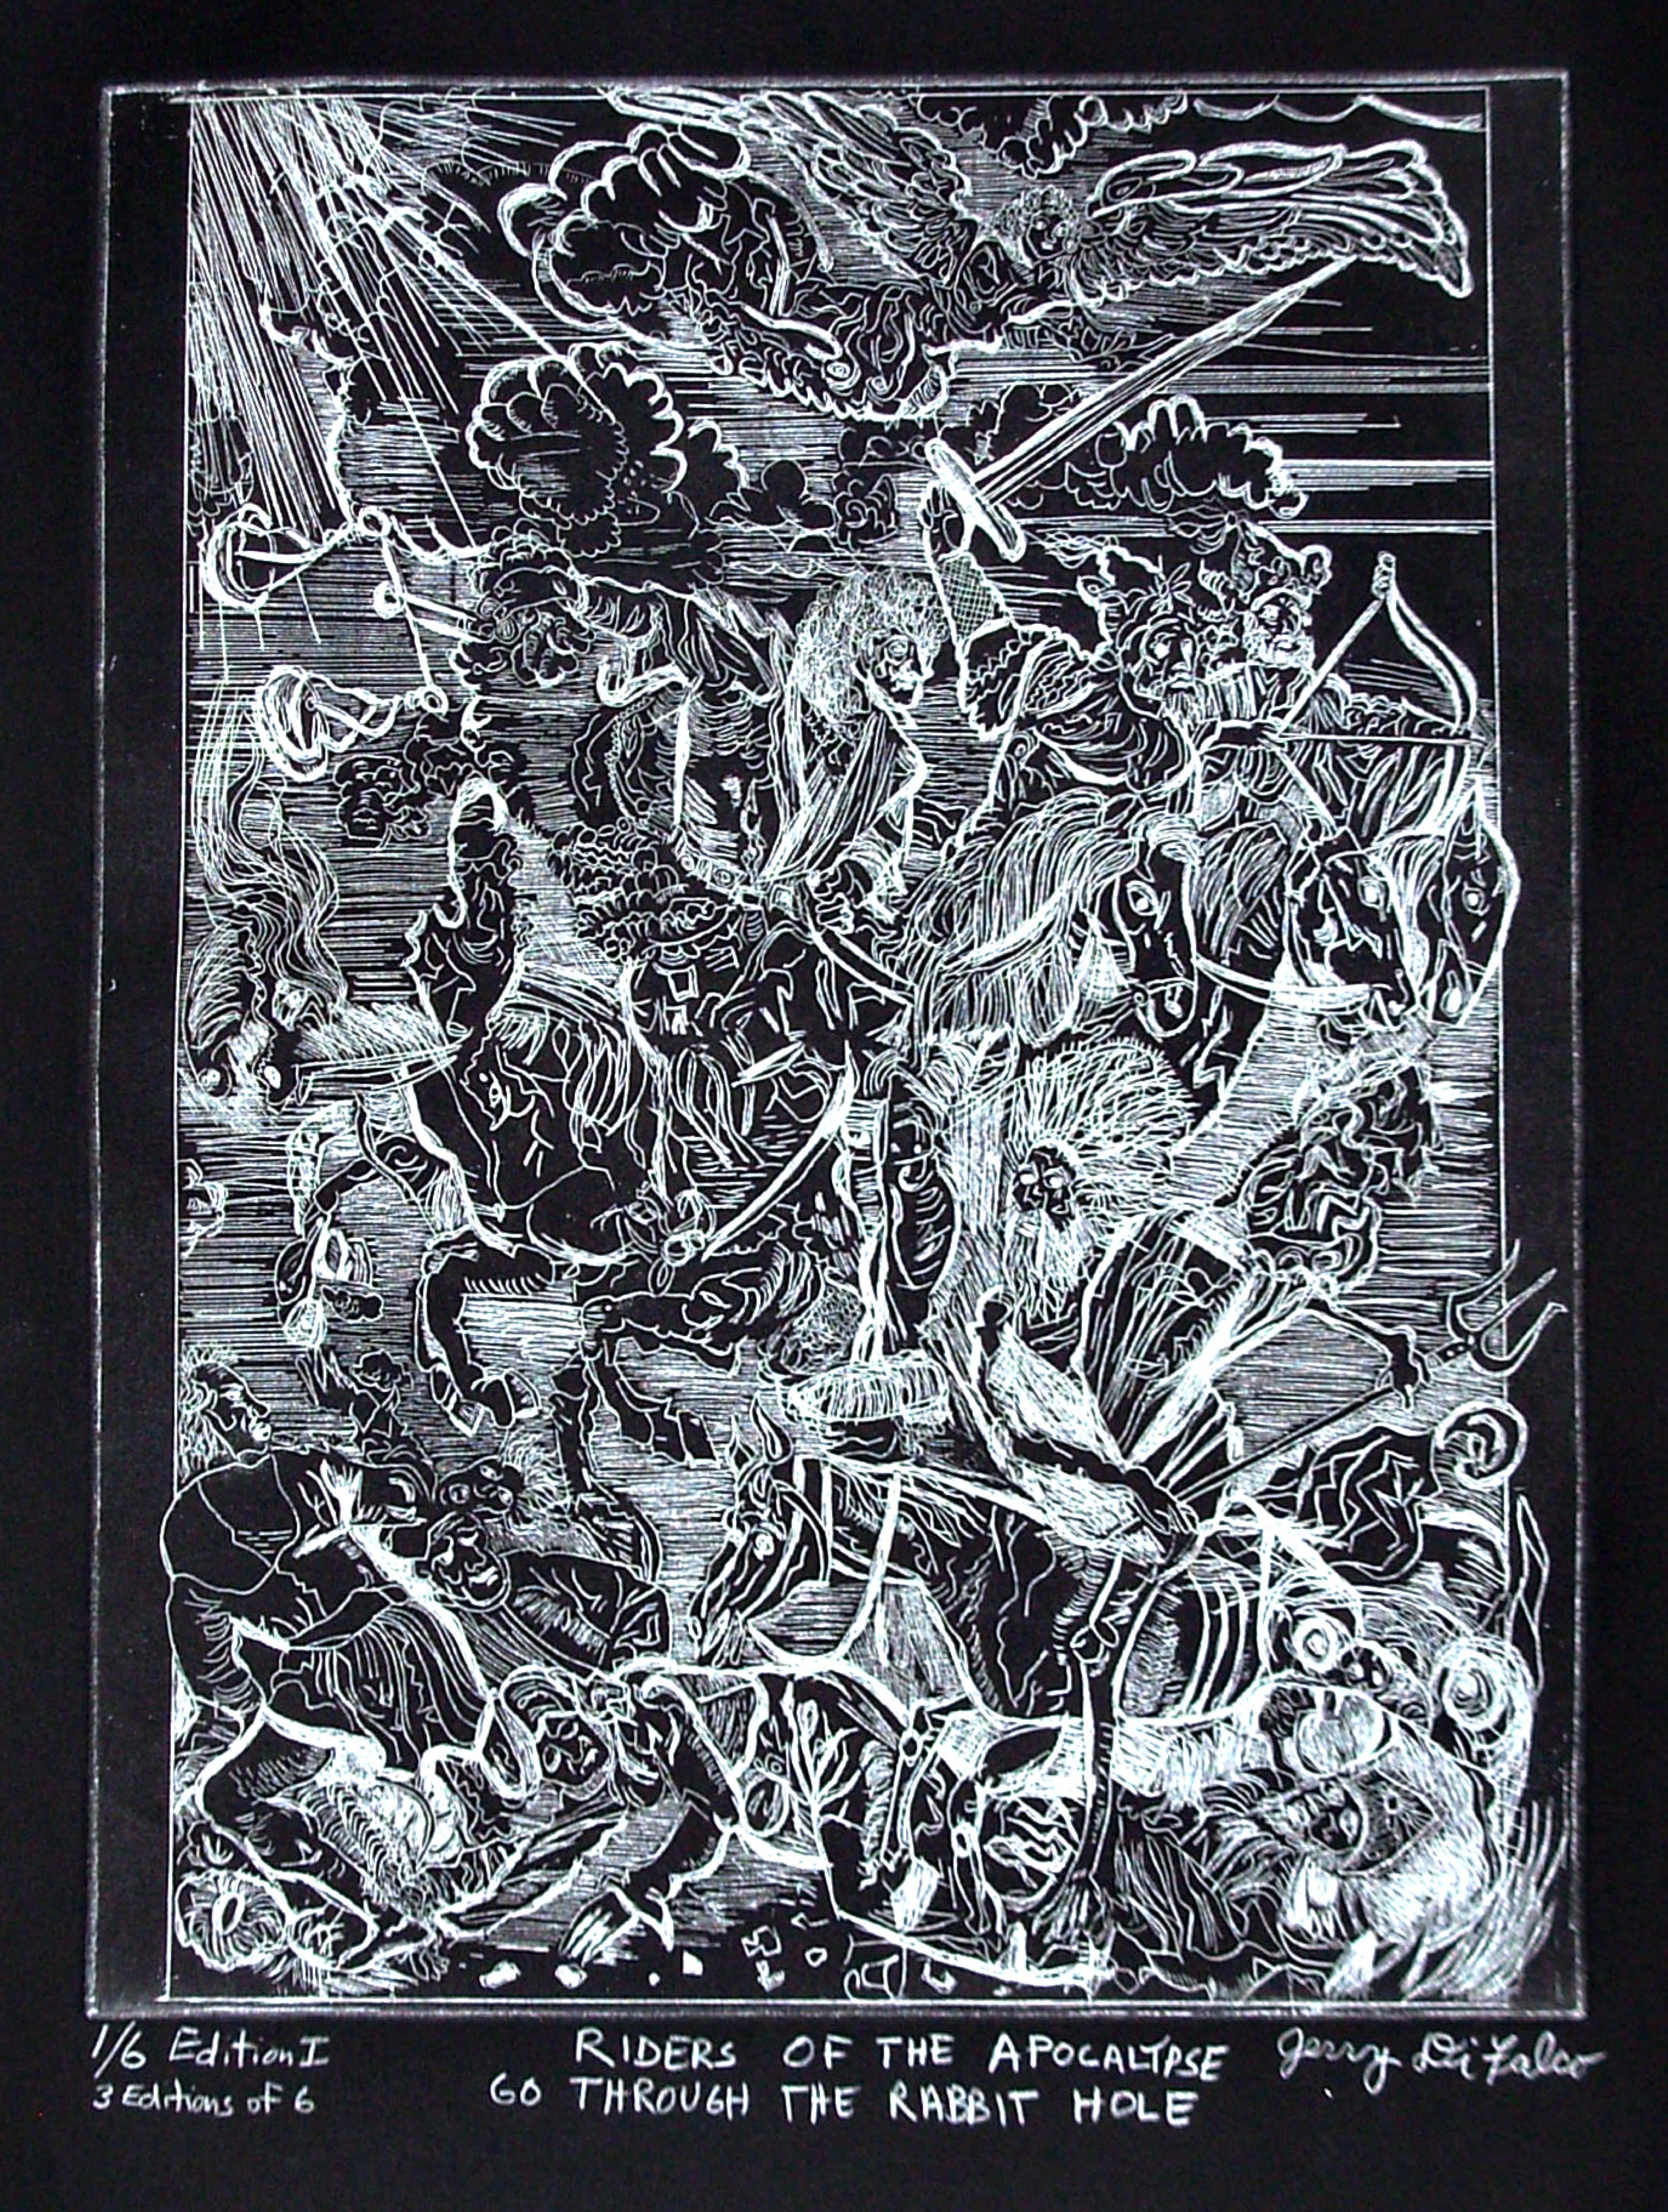 Jerry  Di Falco: 'THE RABBIT HOLE APOCALYPSE', 2010 Intaglio, Optical. title is, RIDERS OF THE APOCALYPSE GO THROUGH THE RABBIT HOLE. One should study this hand pilled intaglio carefully to see the optical illusion within it. The revelations you find may make you wonder if the left and right sides of the brain are really separate hemispheres. This is a ...